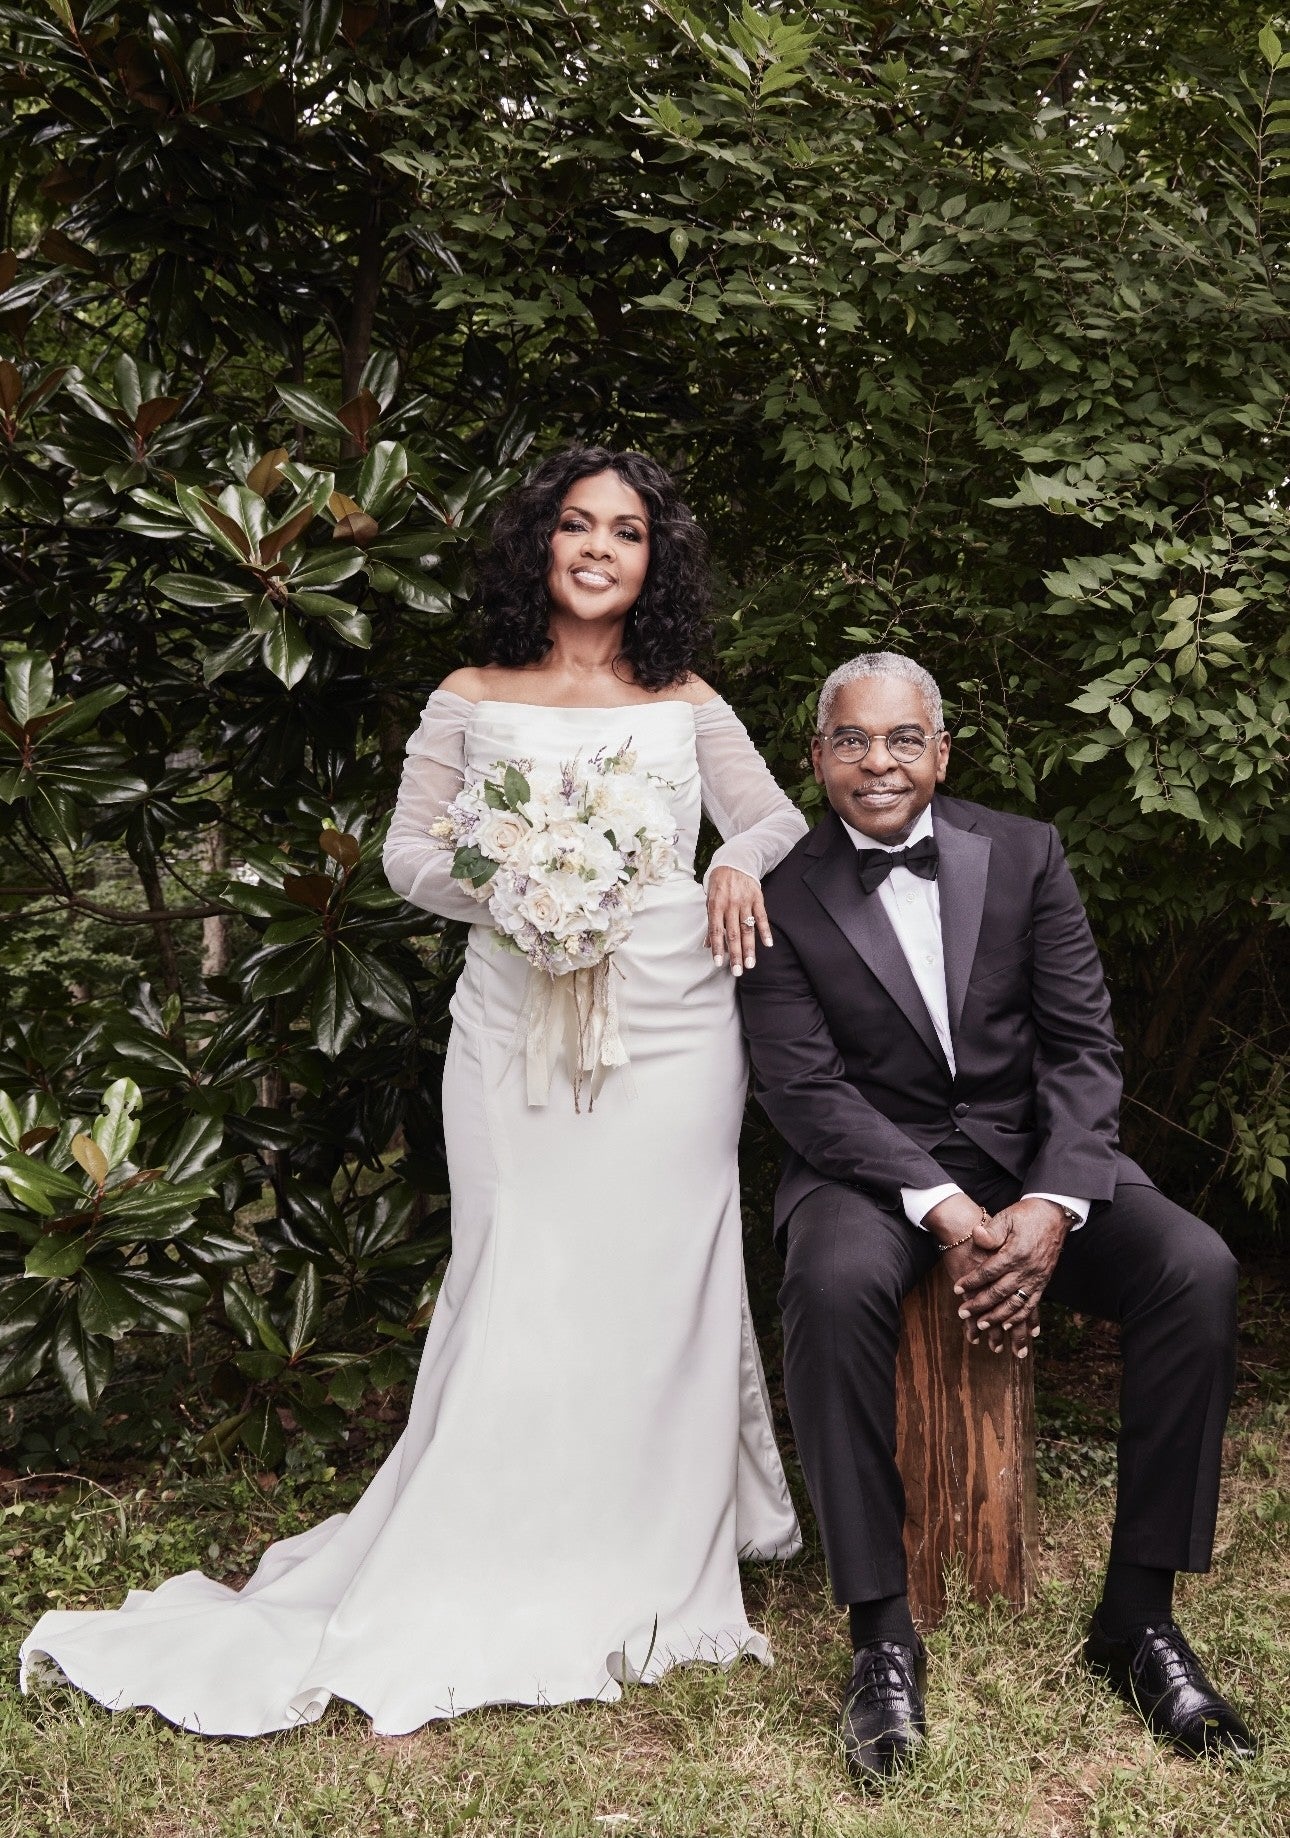 CeCe Winans And Husband Alvin Love Celebrate 40 Years Of Marriage With A Stunning Photo Shoot